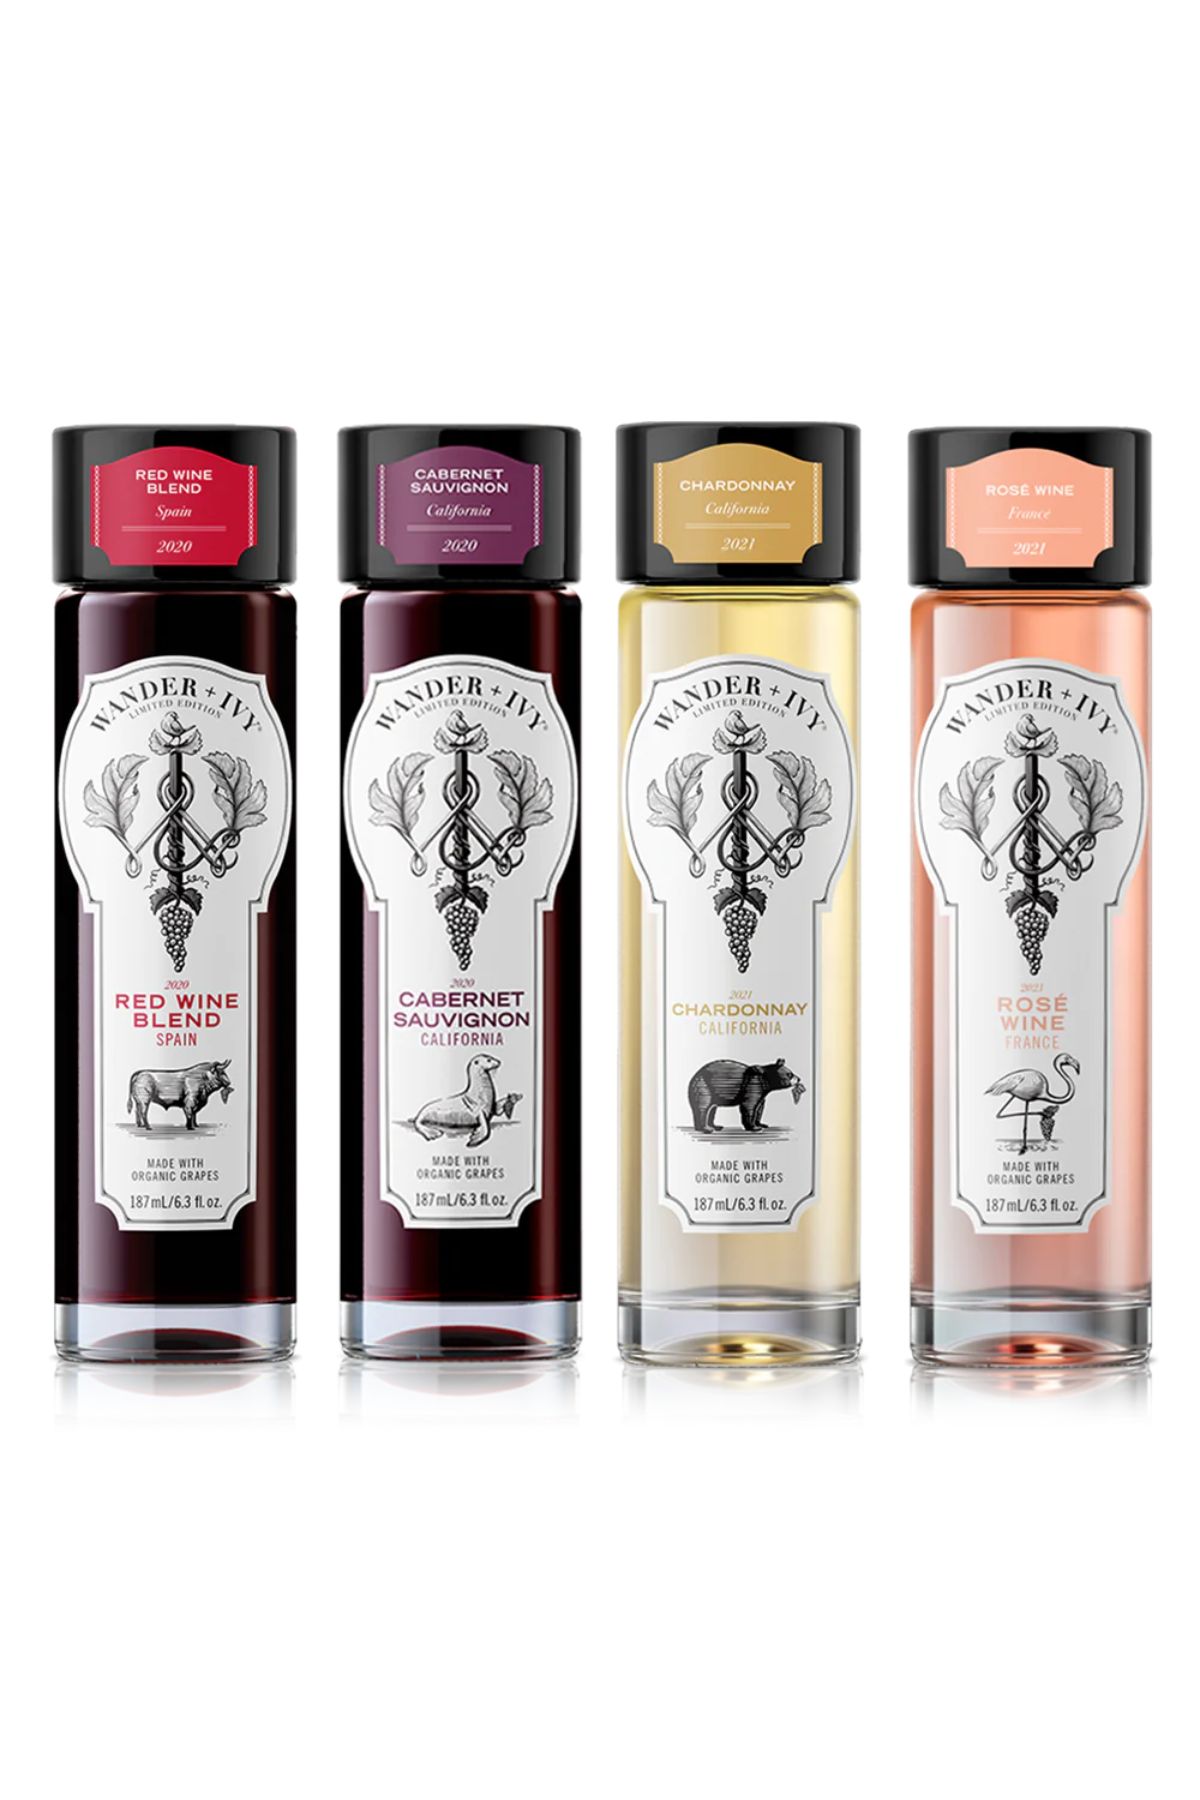 single-serve bottles of red, white, and rosé wine